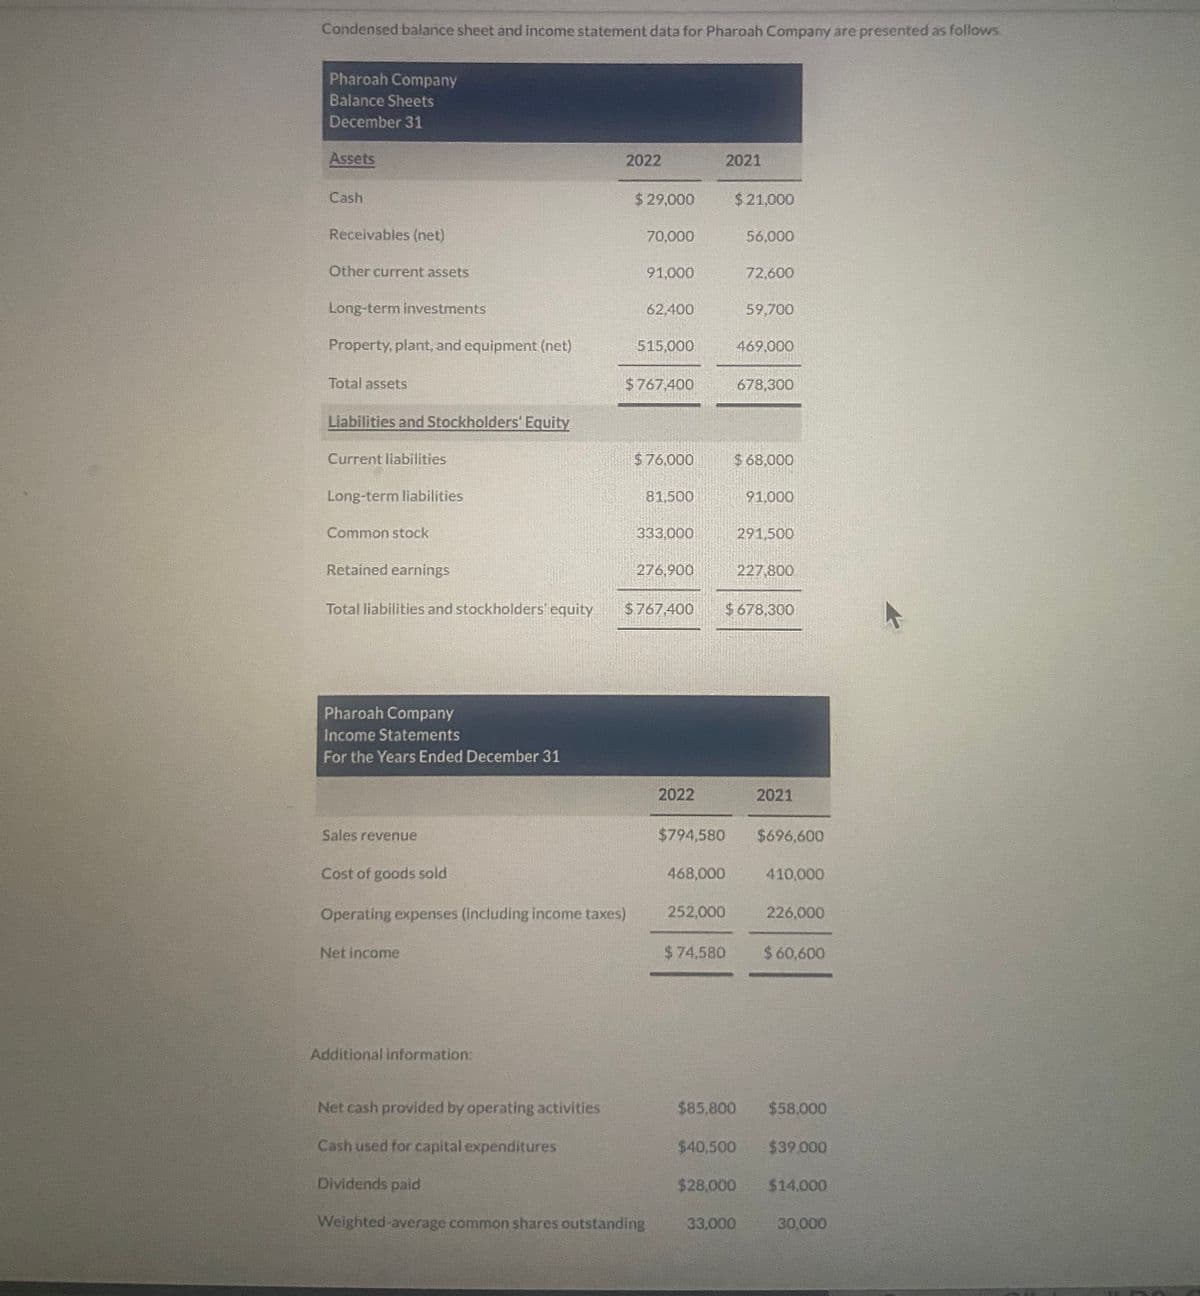 Condensed balance sheet and income statement data for Pharoah Company are presented as follows.
Pharoah Company
Balance Sheets
December 31
Assets
2022
2021
Cash
$29,000
$21,000
Receivables (net)
70,000
56,000
Other current assets
91,000
72,600
Long-term investments
62,400
59,700
Property, plant, and equipment (net)
515,000
469,000
Total assets
$767,400
678,300
Liabilities and Stockholders' Equity
Current liabilities
$76,000
$68,000
Long-term liabilities
81,500
91,000
Common stock
333,000
291,500
Retained earnings
276,900
227,800
Total liabilities and stockholders' equity
$767,400
$ 678,300
Pharoah Company
Income Statements
For the Years Ended December 31
2022
2021
Sales revenue
$794,580
$696,600
Cost of goods sold
468,000
410,000
Operating expenses (including income taxes)
252,000
226,000
Net income
$74,580
$ 60,600
Additional information:
Net cash provided by operating activities
$85,800
$58,000
Cash used for capital expenditures
$40,500
$39.000
Dividends paid
$28,000
$14,000
Weighted-average common shares outstanding
33,000
30,000
